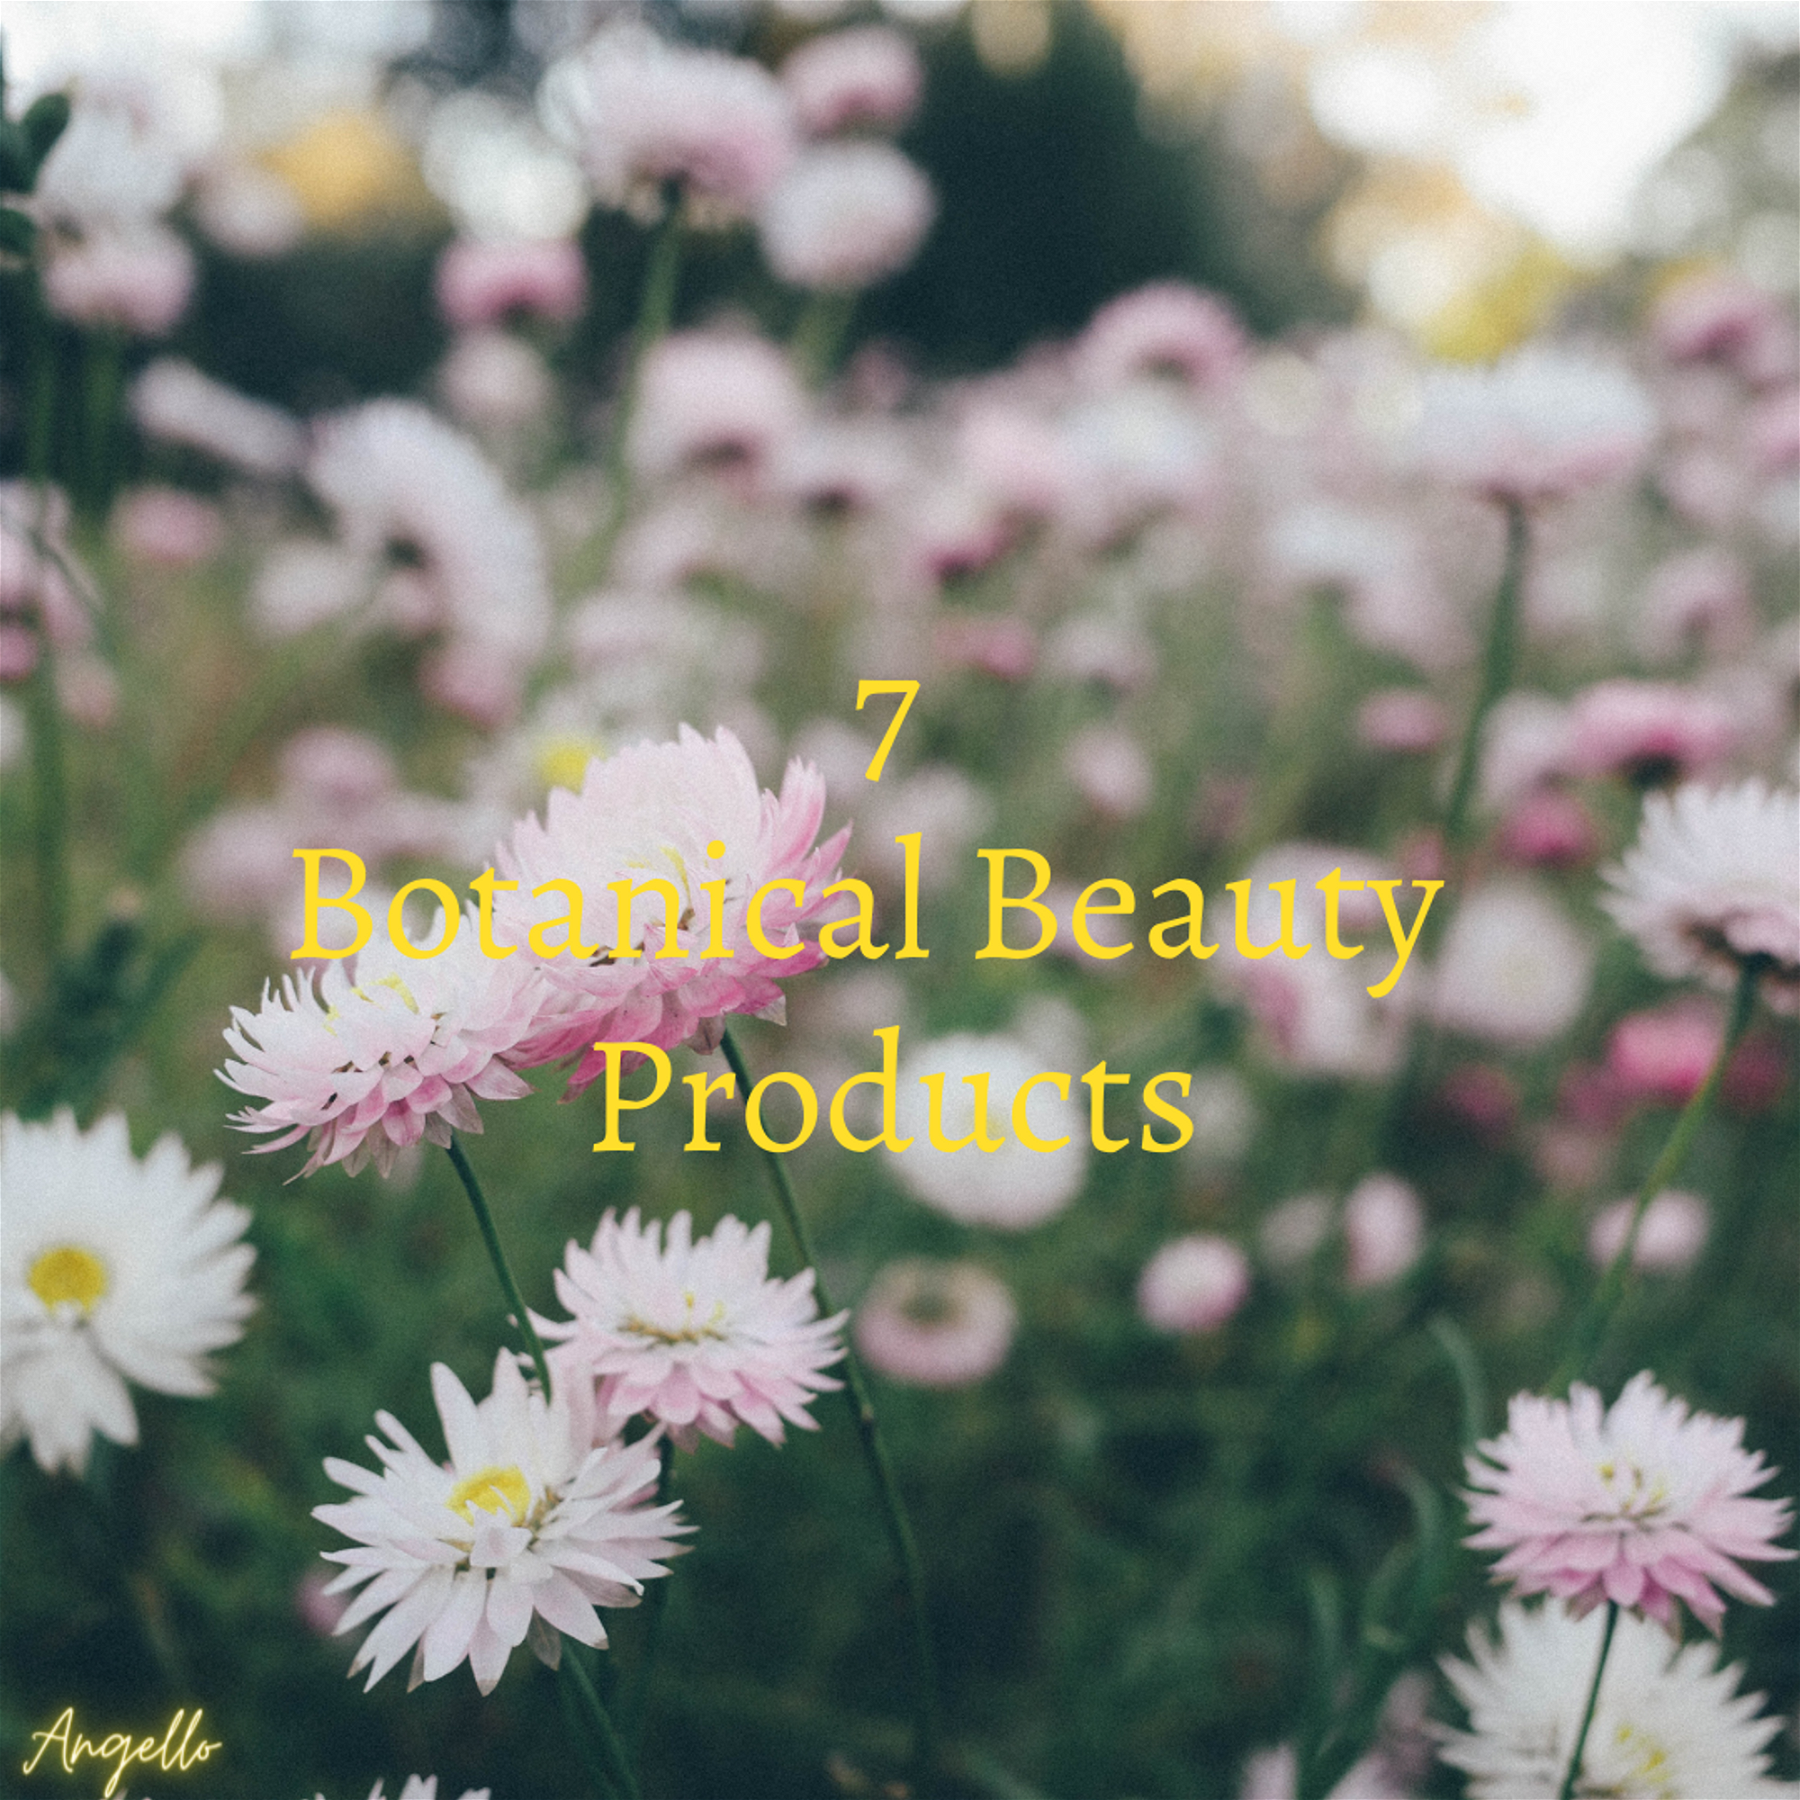 7 Botanical Beauty Products to Incorporate Into Your Routine